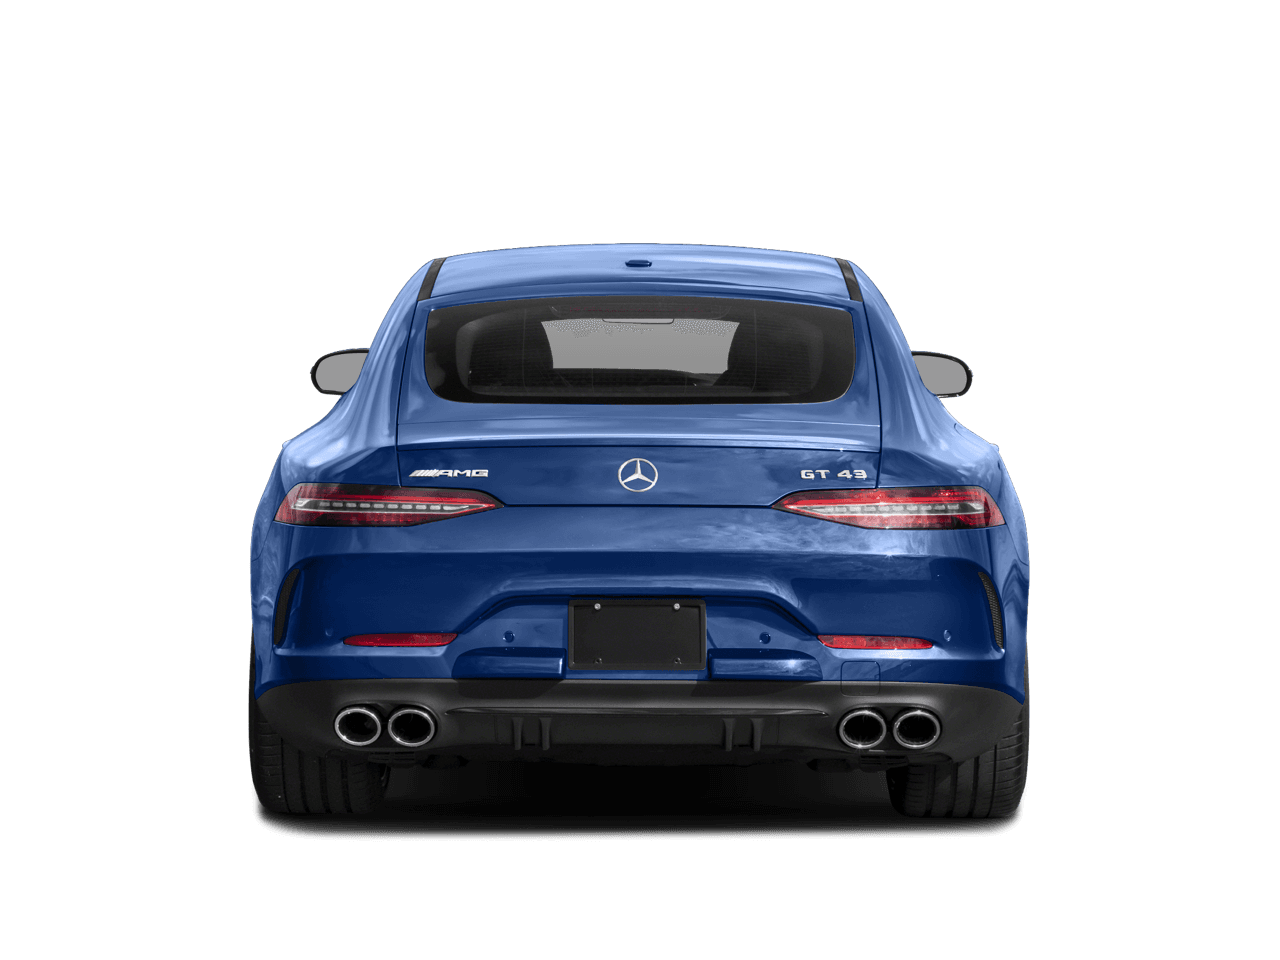 2021 Mercedes-Benz AMG® GT 43 Photo in Wooster, OH 44691